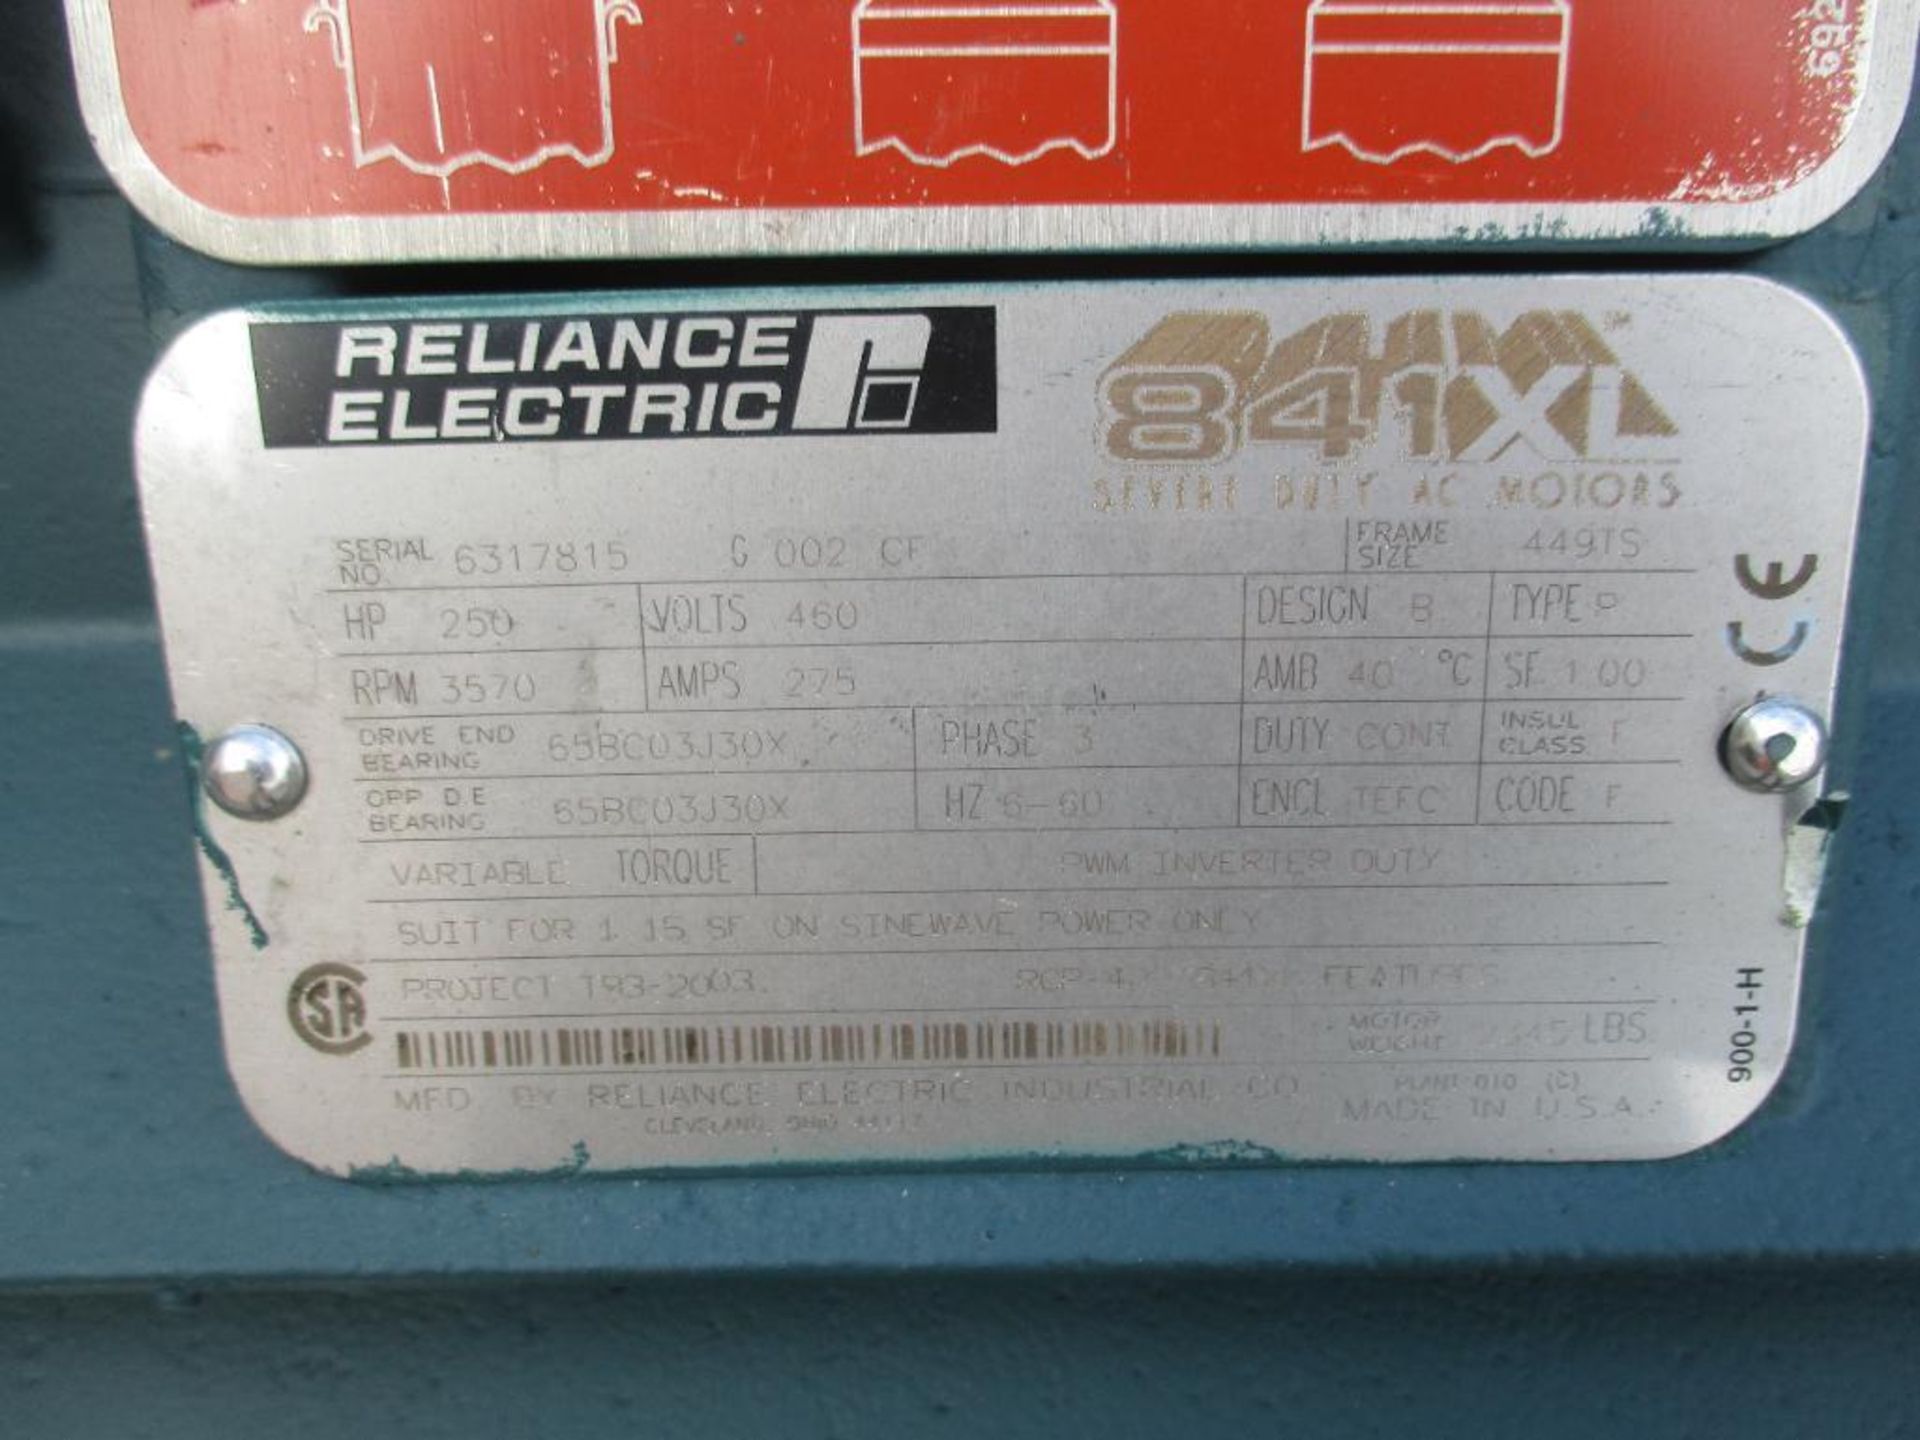 RELIANCE ELECTRIC 3 PHASE 250HP 3570RPM 449TS FRAME A/C MOTOR P/N 841XL 2294# LBS (THIS LOT IS FOB K - Image 2 of 5